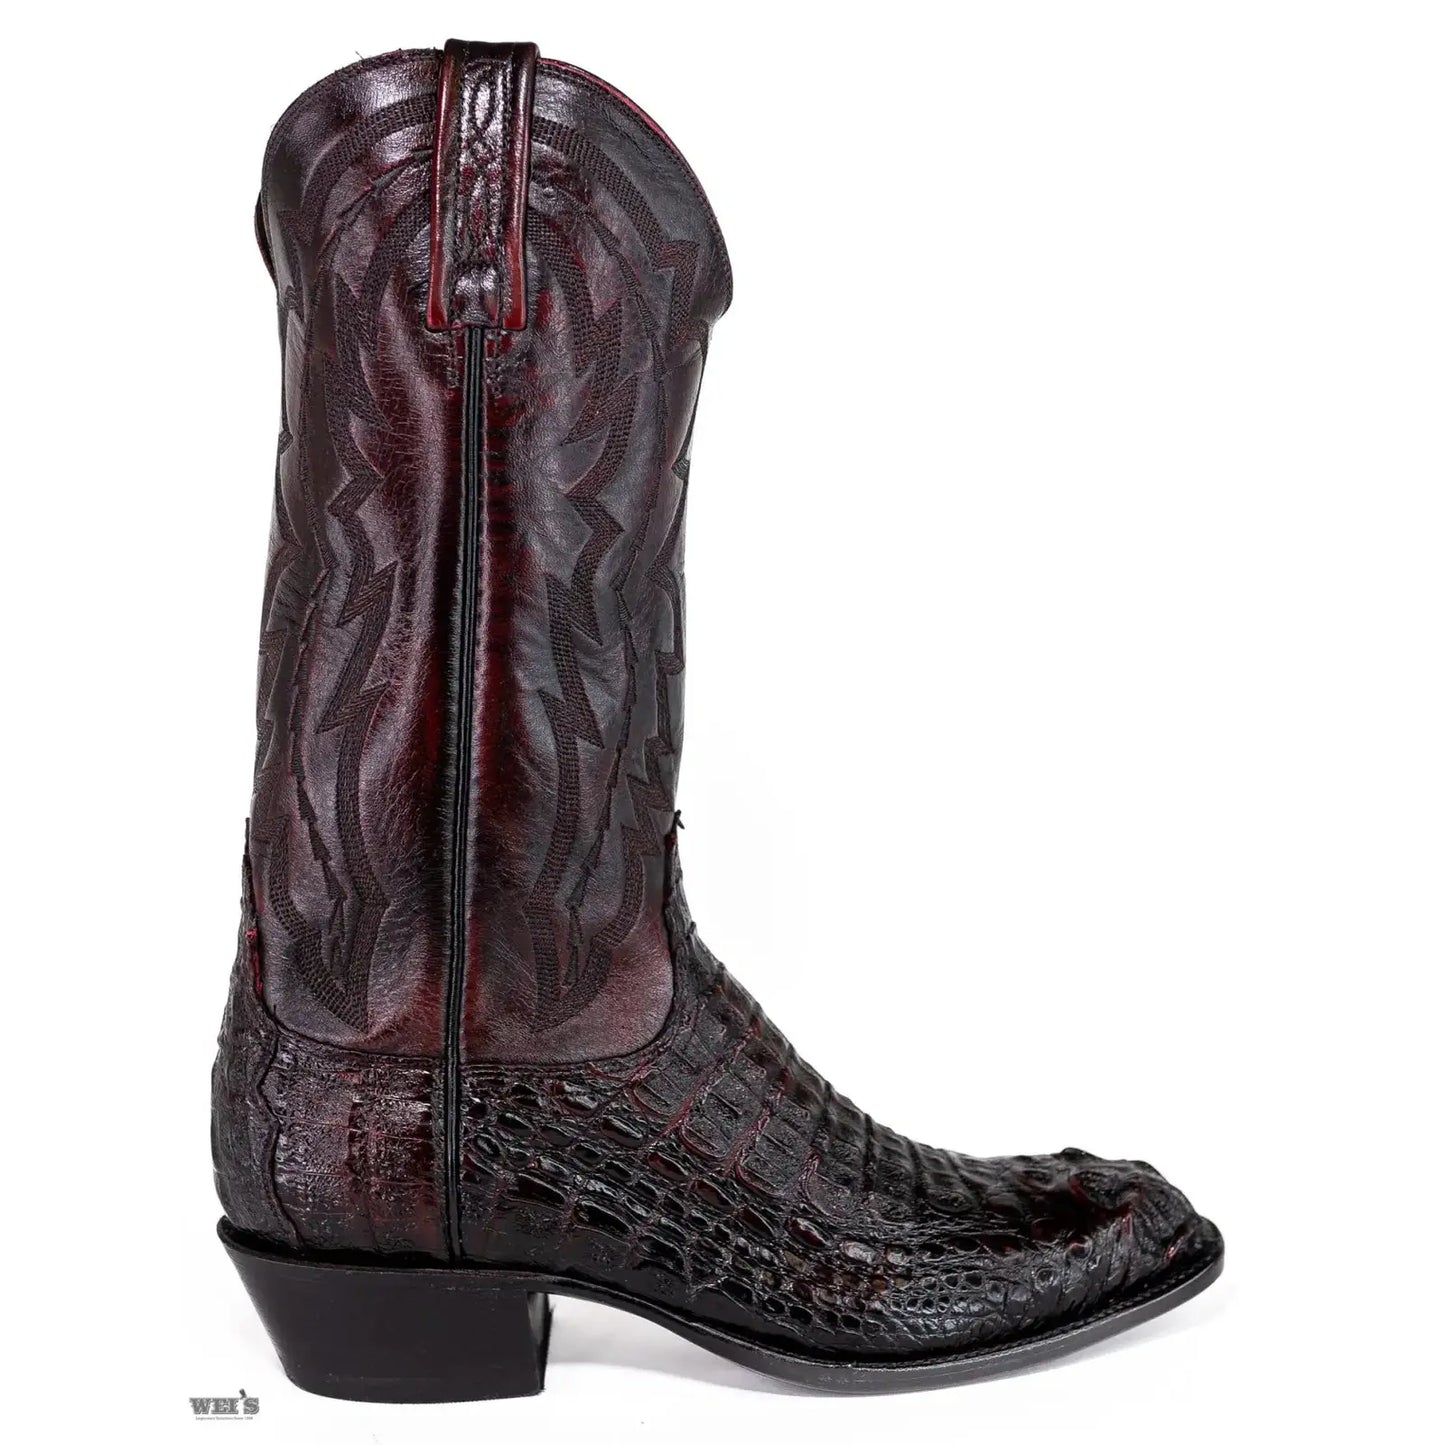 Lucchese 2000 Men's Cowboy Boots 13" Exotic Caiman/Deer T3034.R4